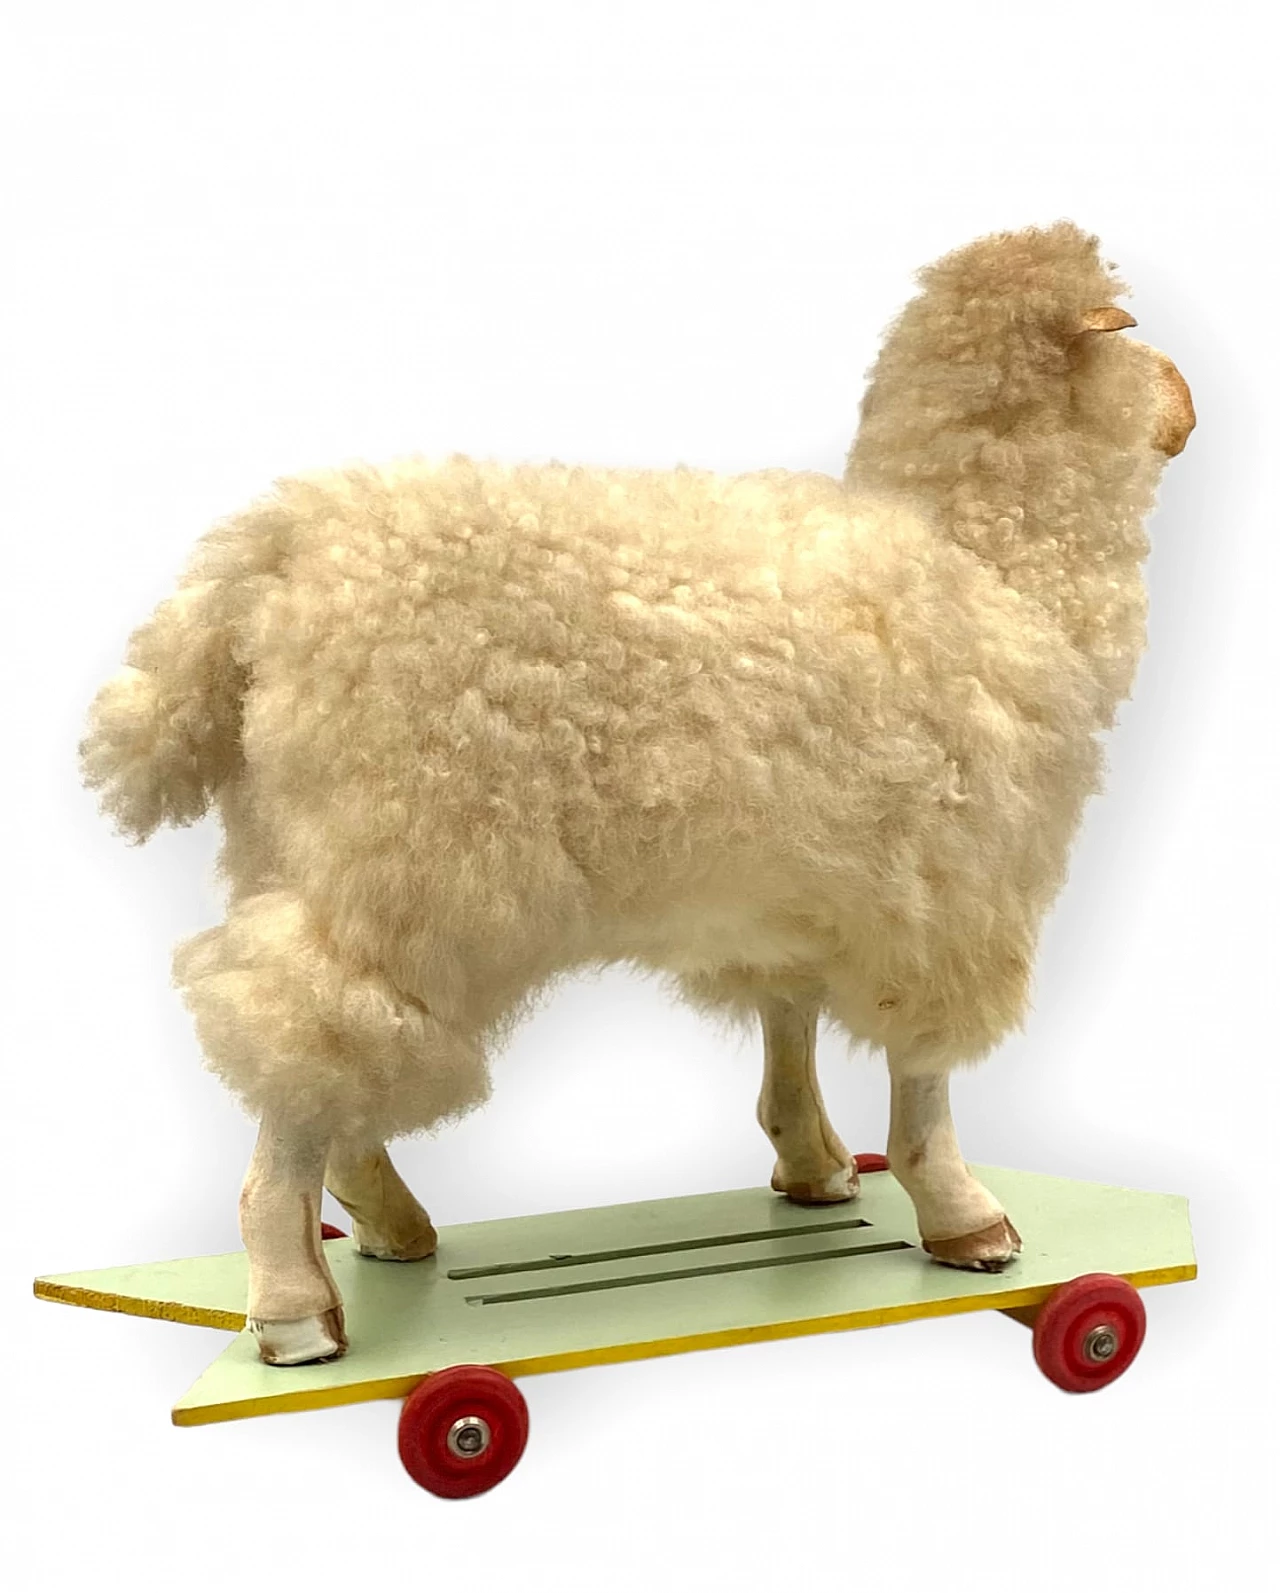 Wool and wood toy sheep with wheels 15